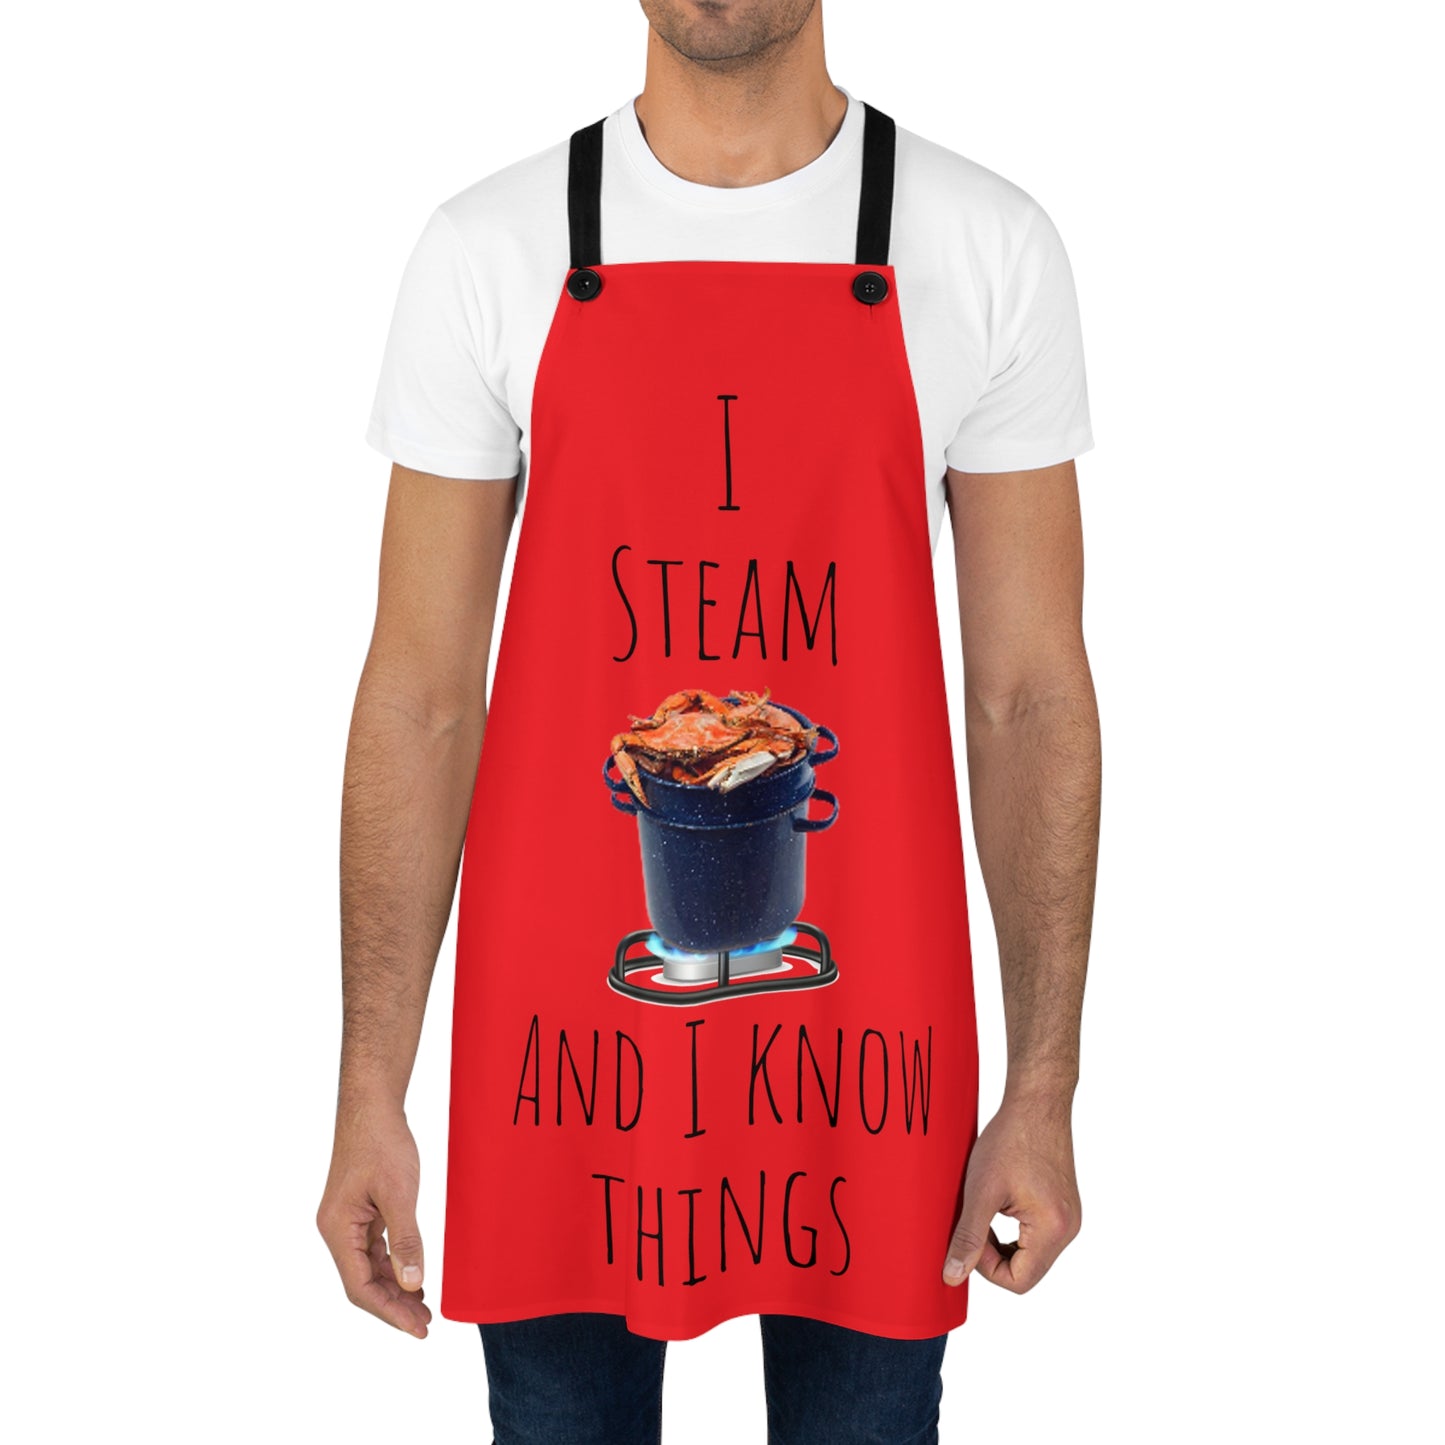 I steam and I know things Apron